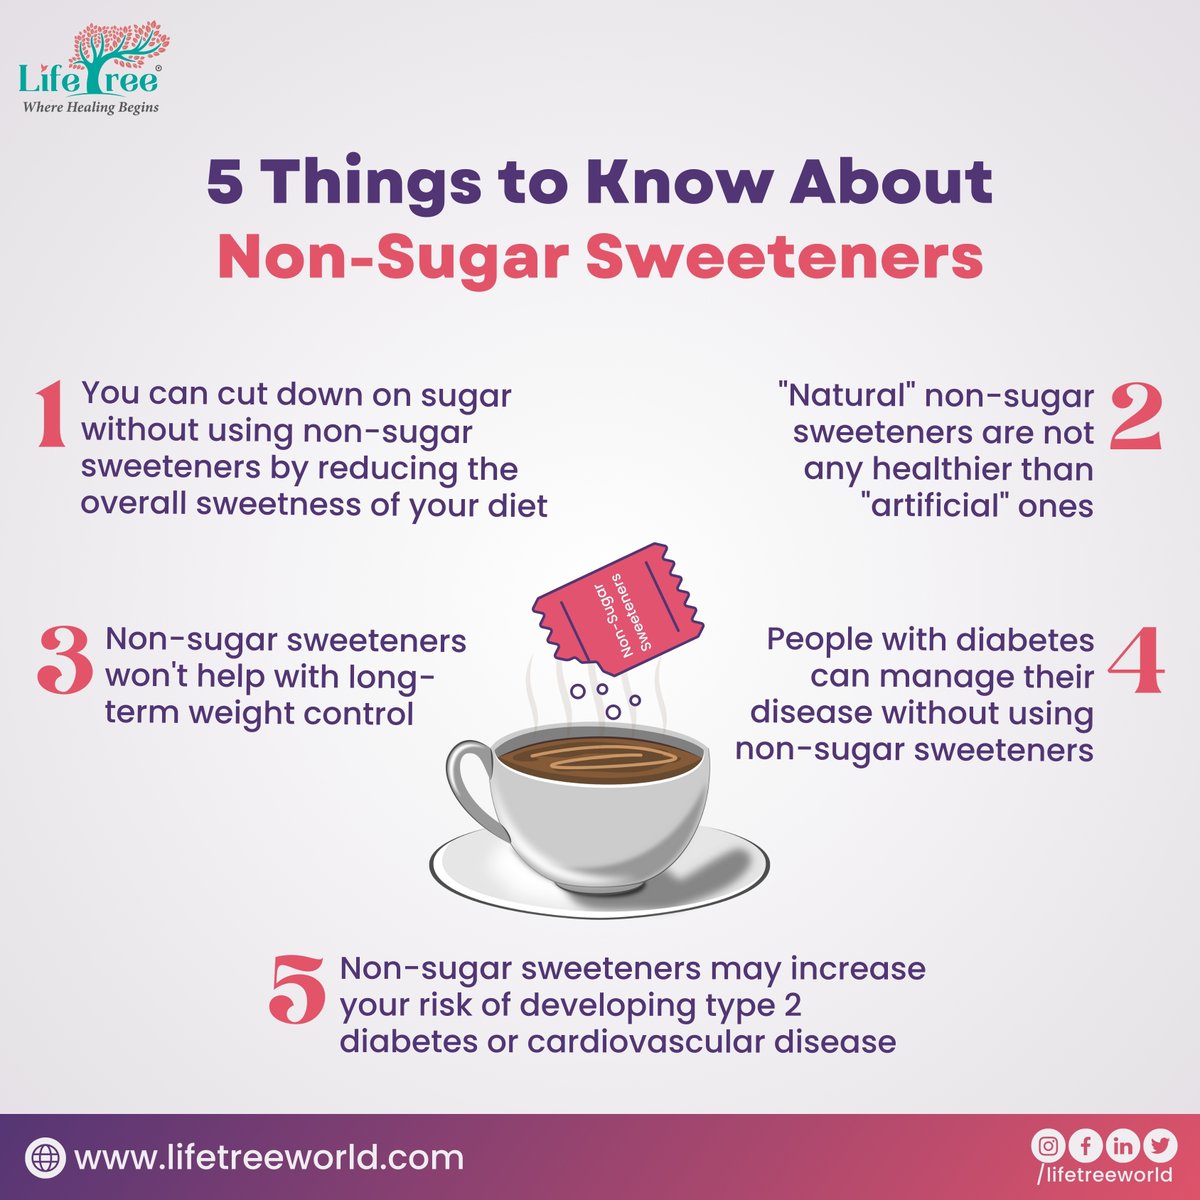 📷 5 Things to Know About Non-Sugar Sweeteners !
#ATTENTION #diabetes #sweeteners #weightloss #weightcontrol #diabetesmanagement